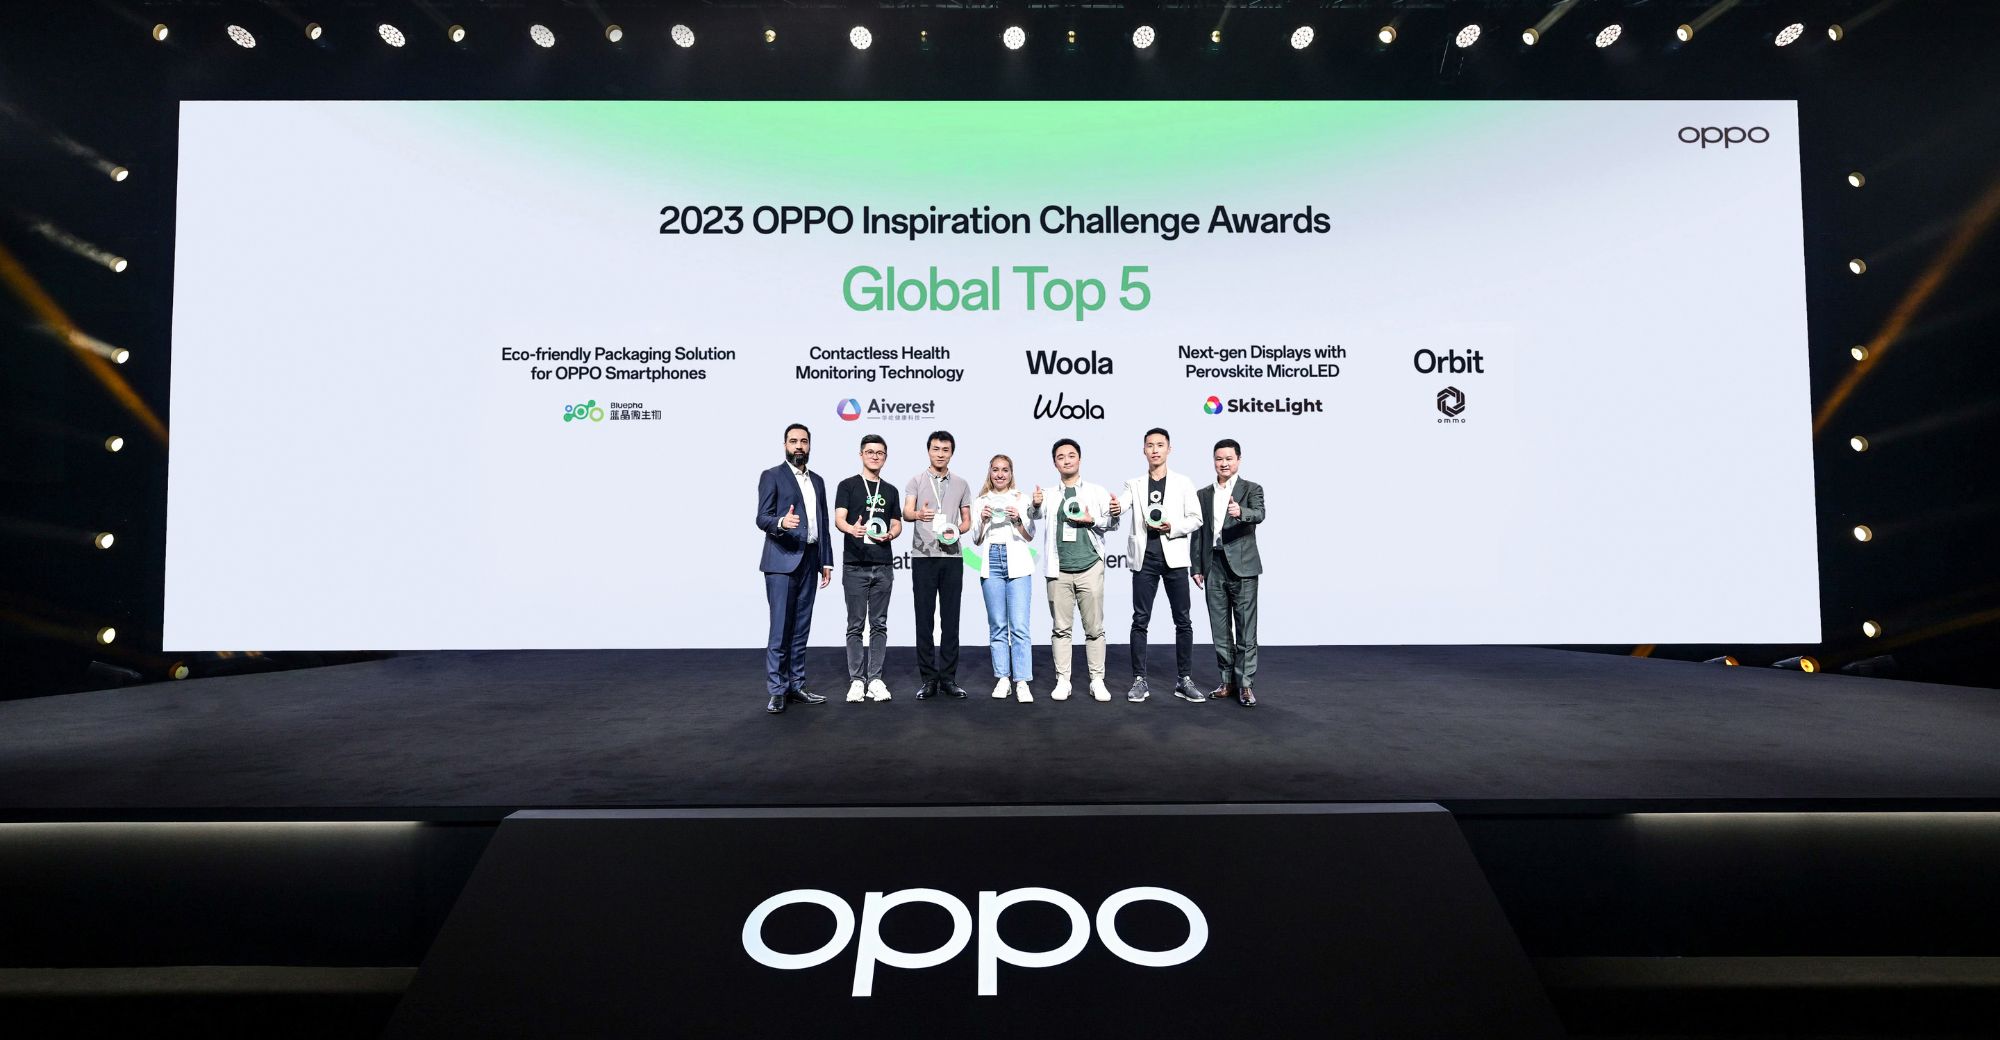 OPPO Annouces Top 5 Proposals At Inspiration Challenge Global Final Demo Event